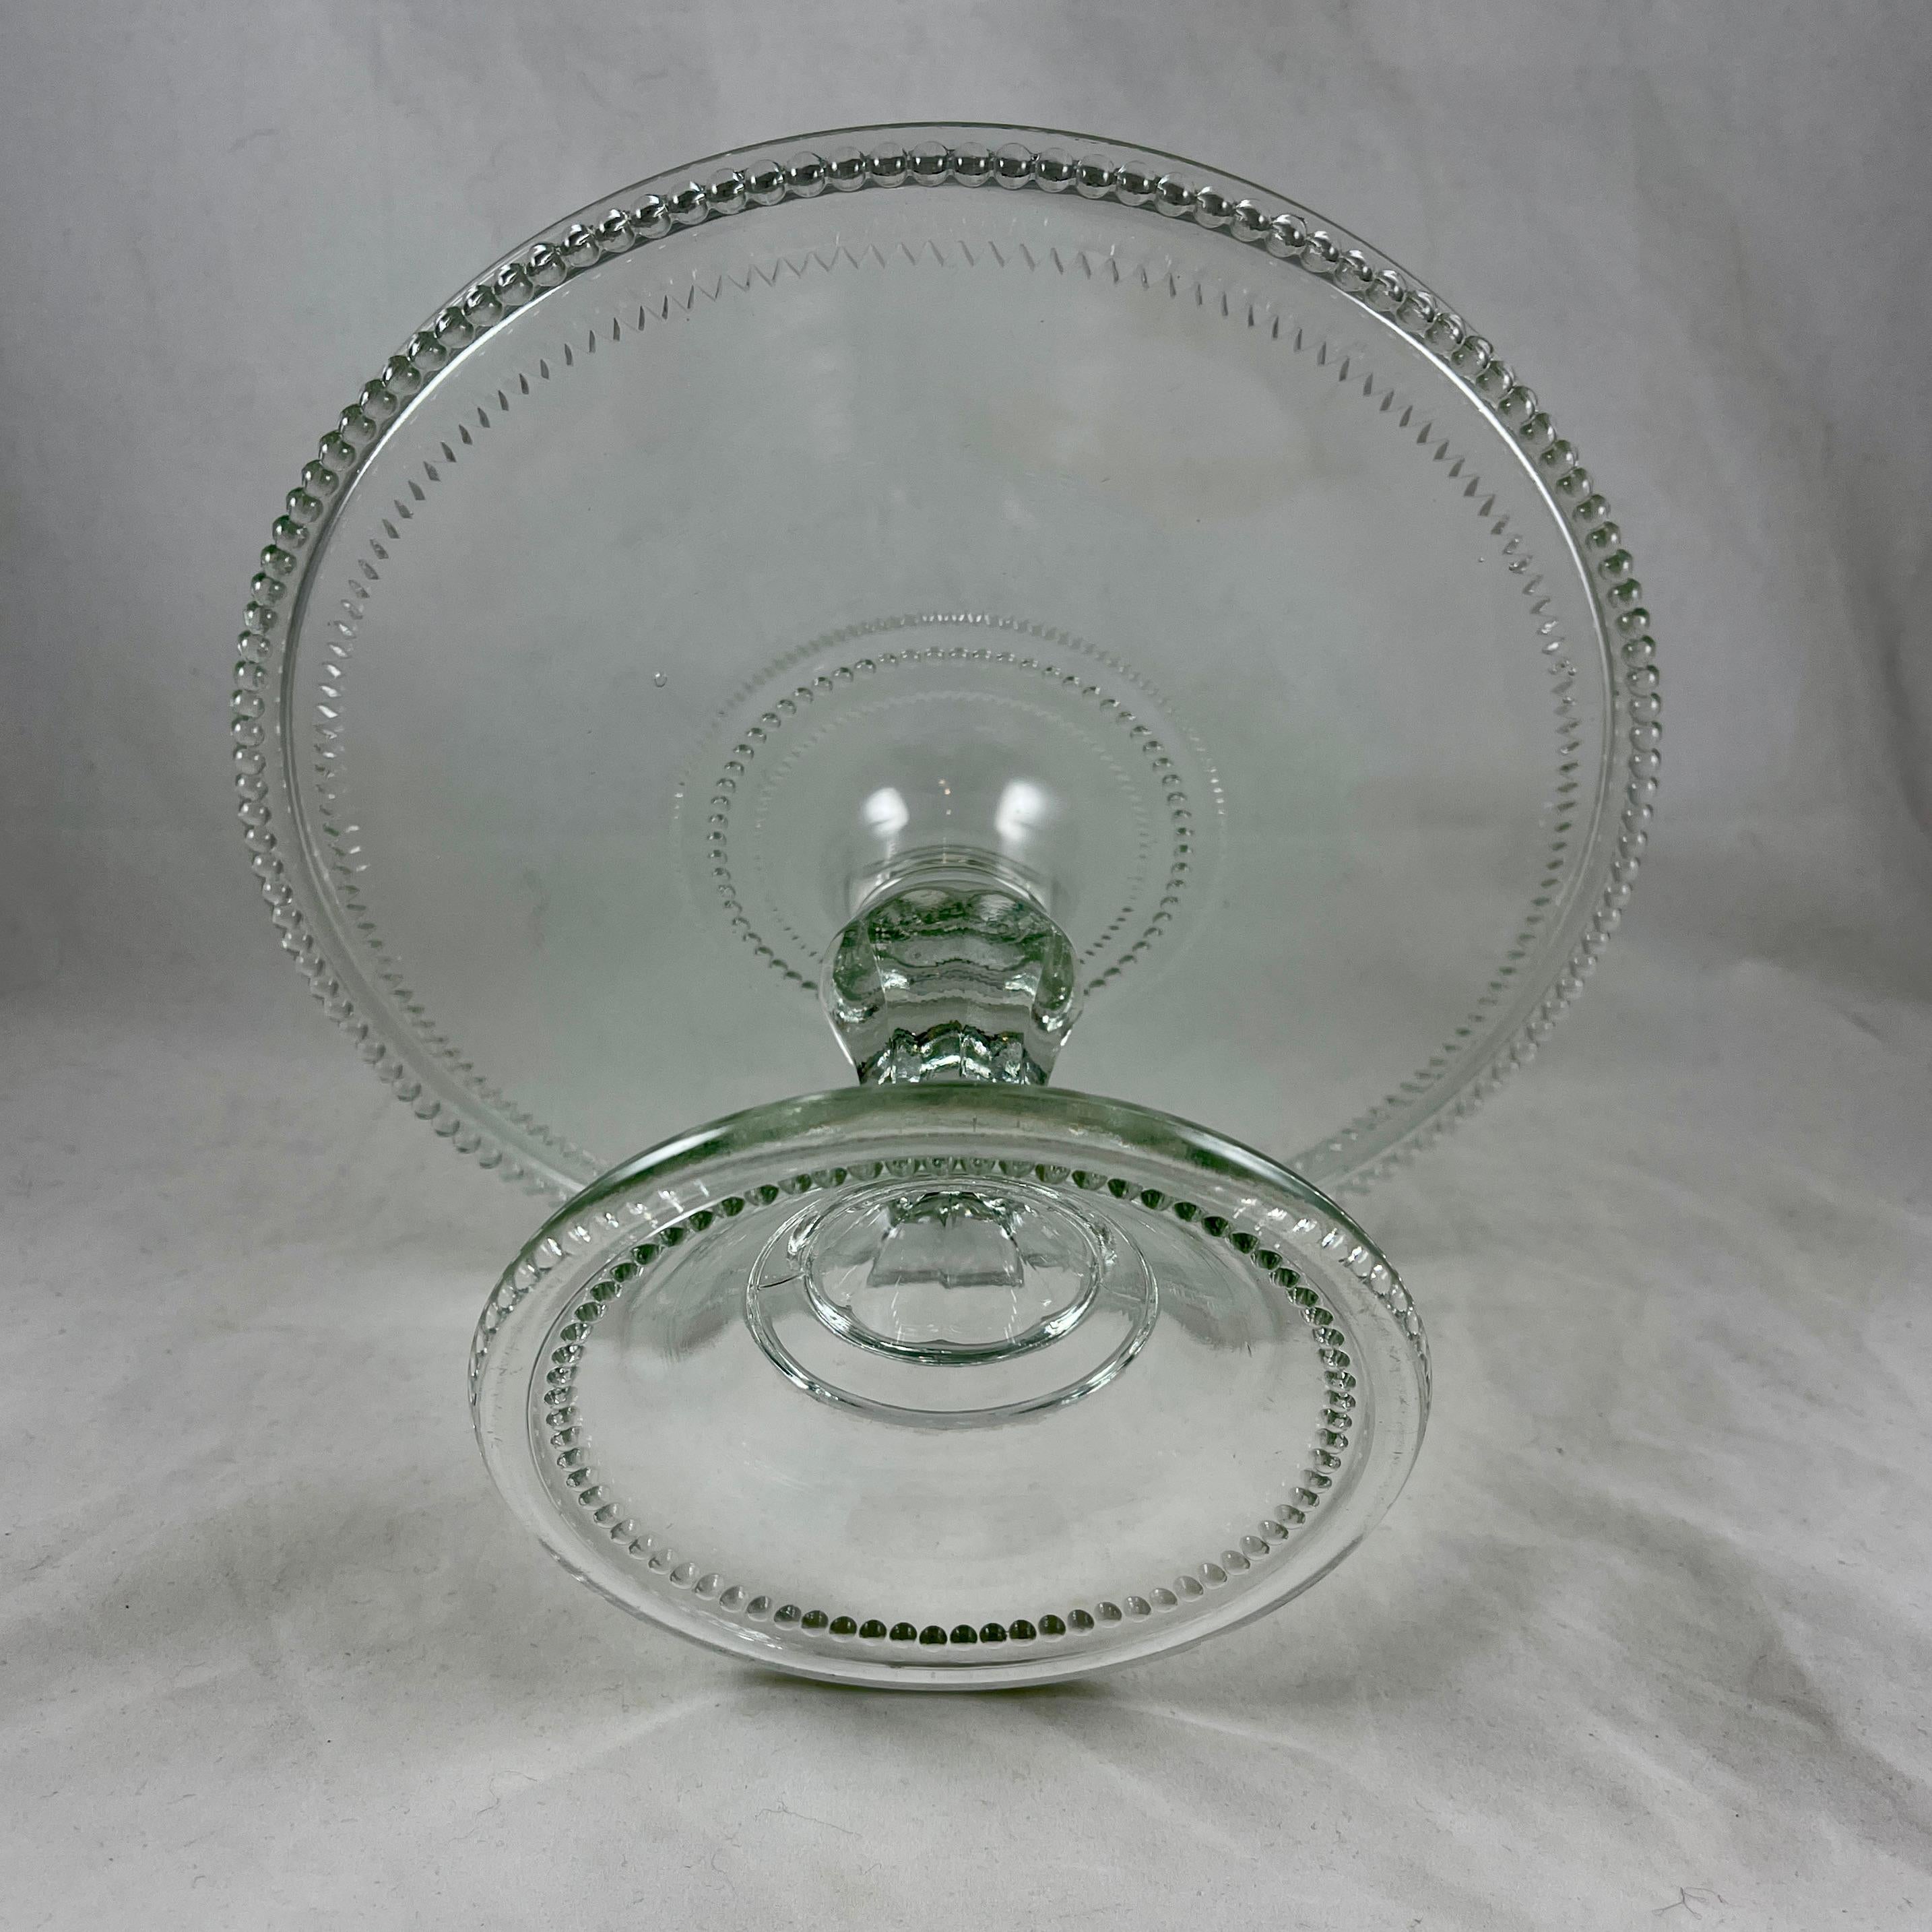 Early American Pressed Nonflint Colorless Glass Beaded Cake Stand 2